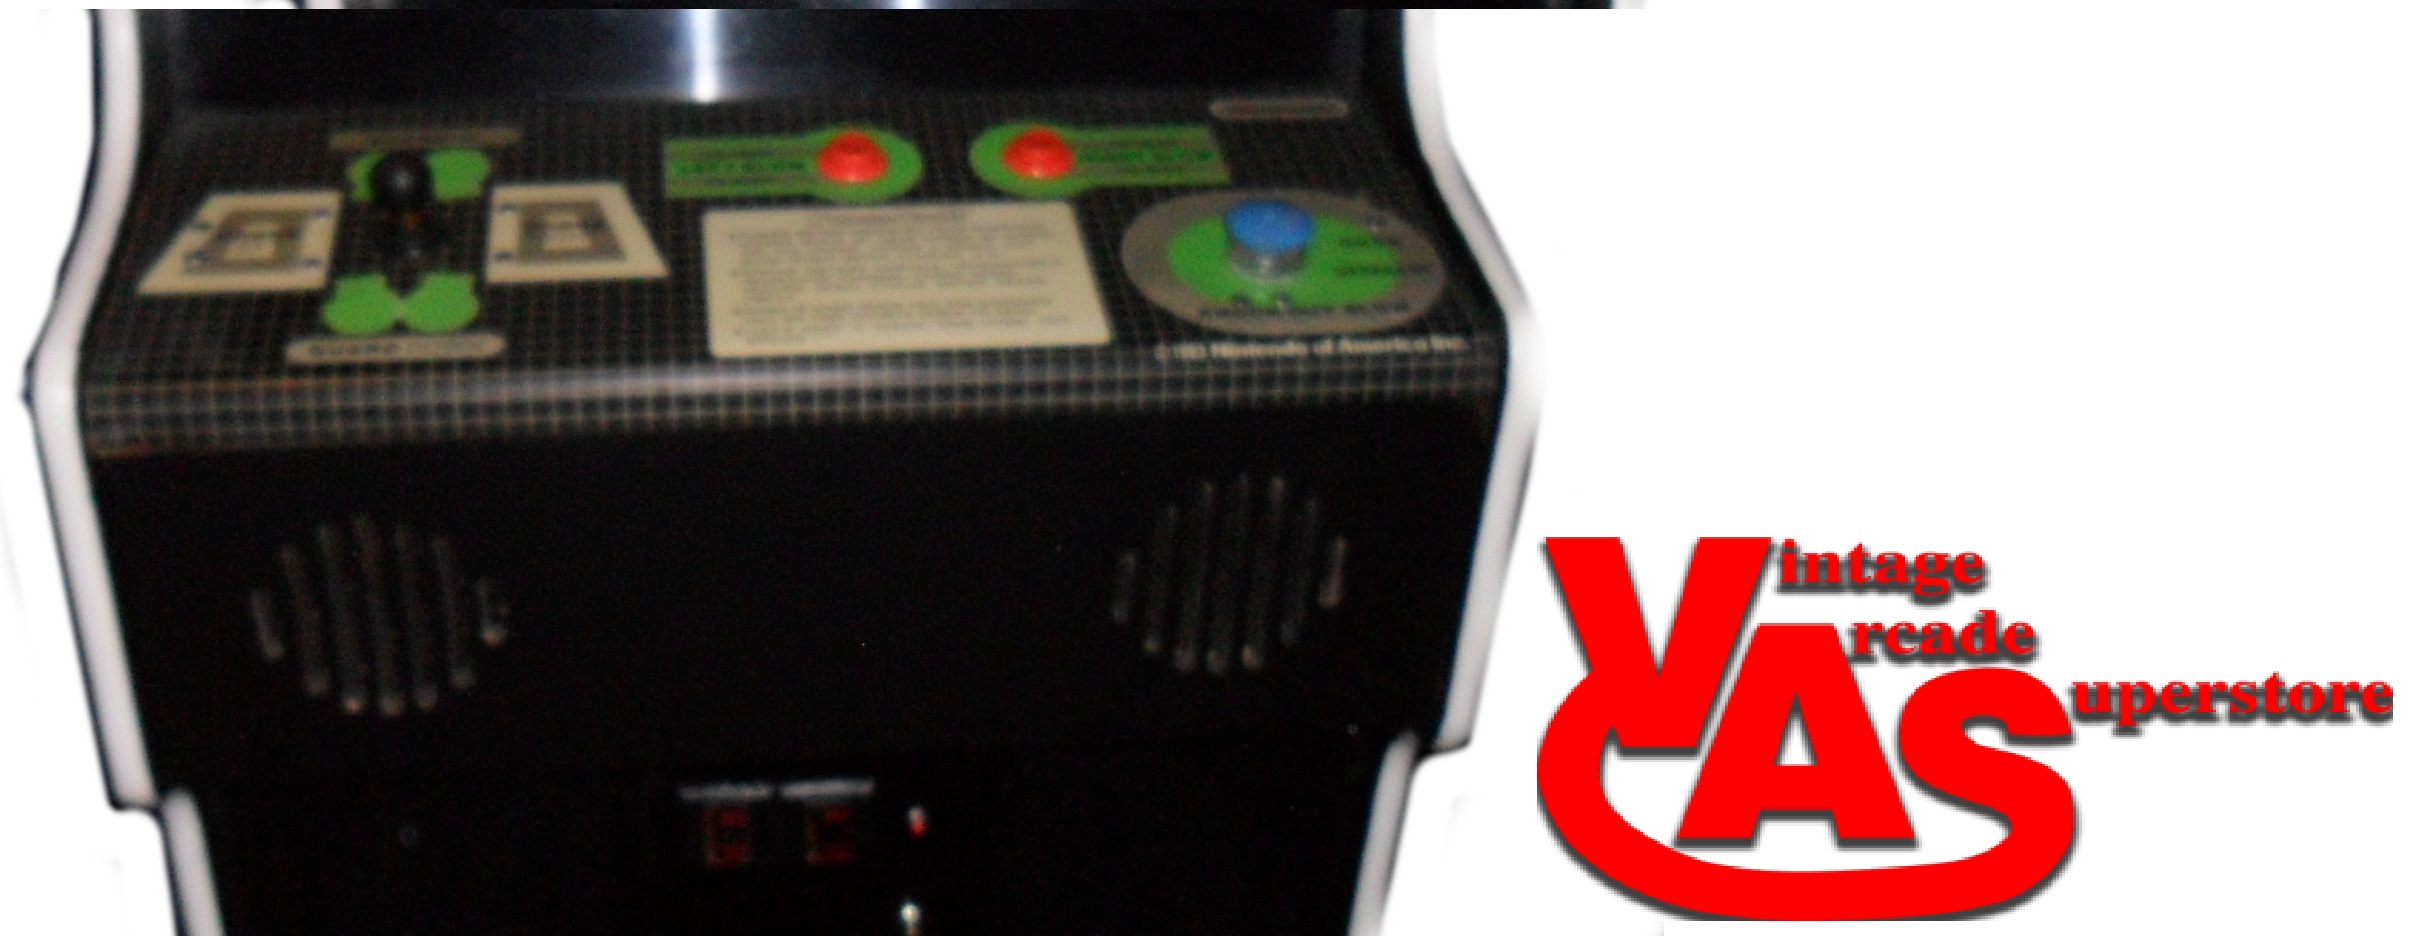 old arcade games for mac